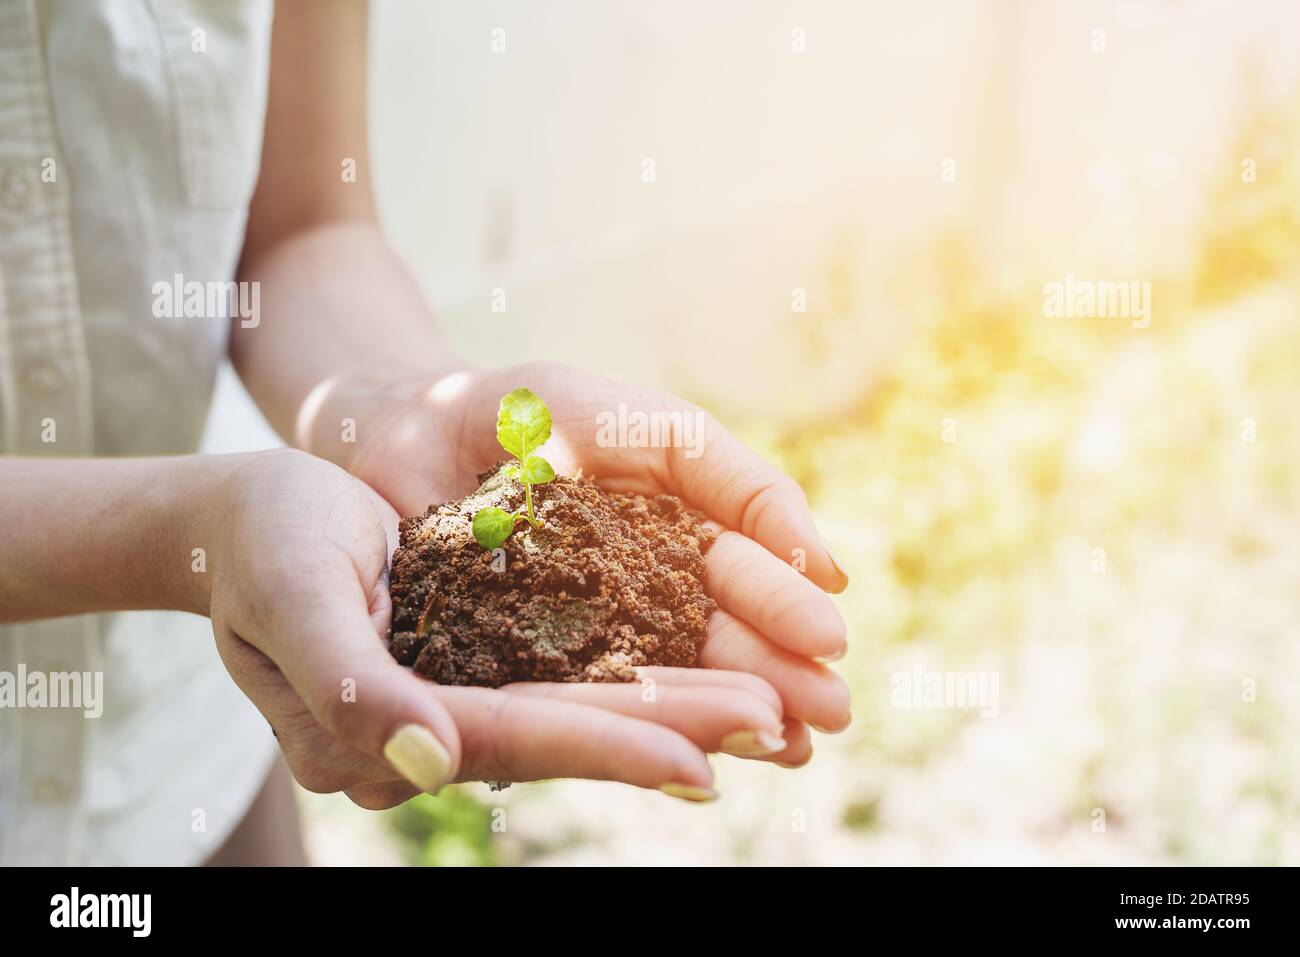 Hand holding growing tree, with bright sunlight Stock Photo